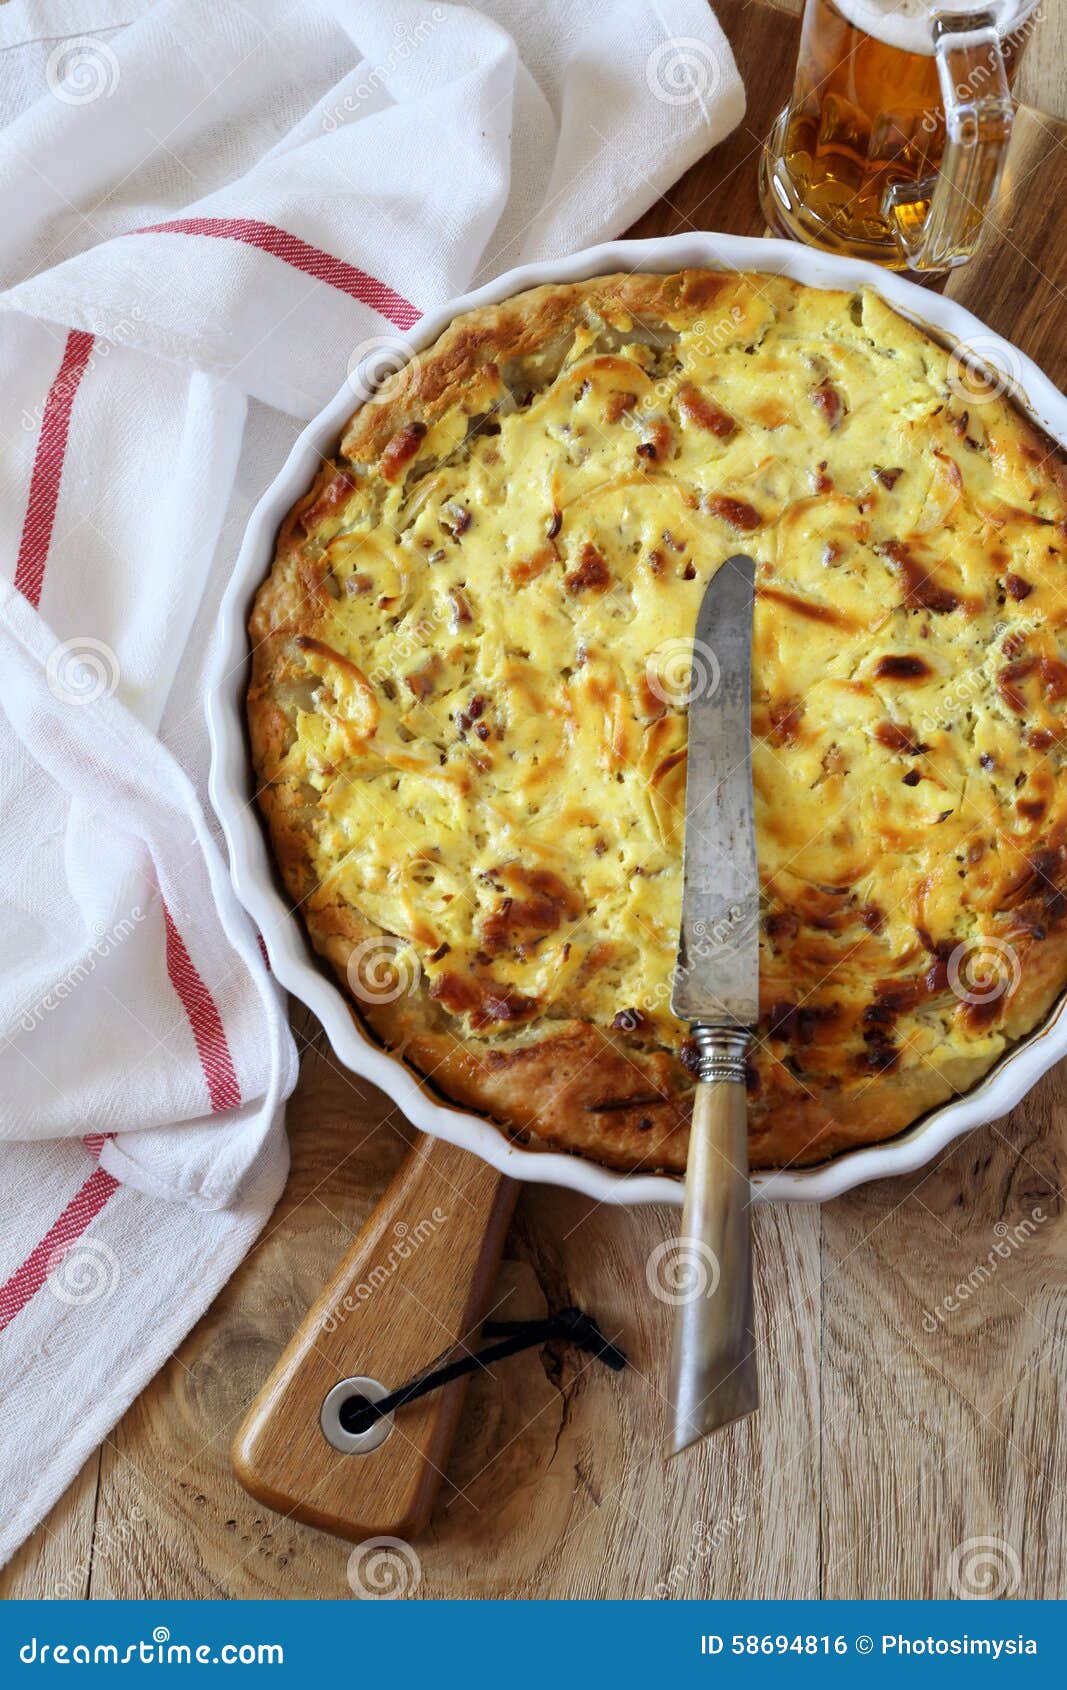 Quiche Lorraine, French Pie and Beer Stock Photo - Image of bakery ...